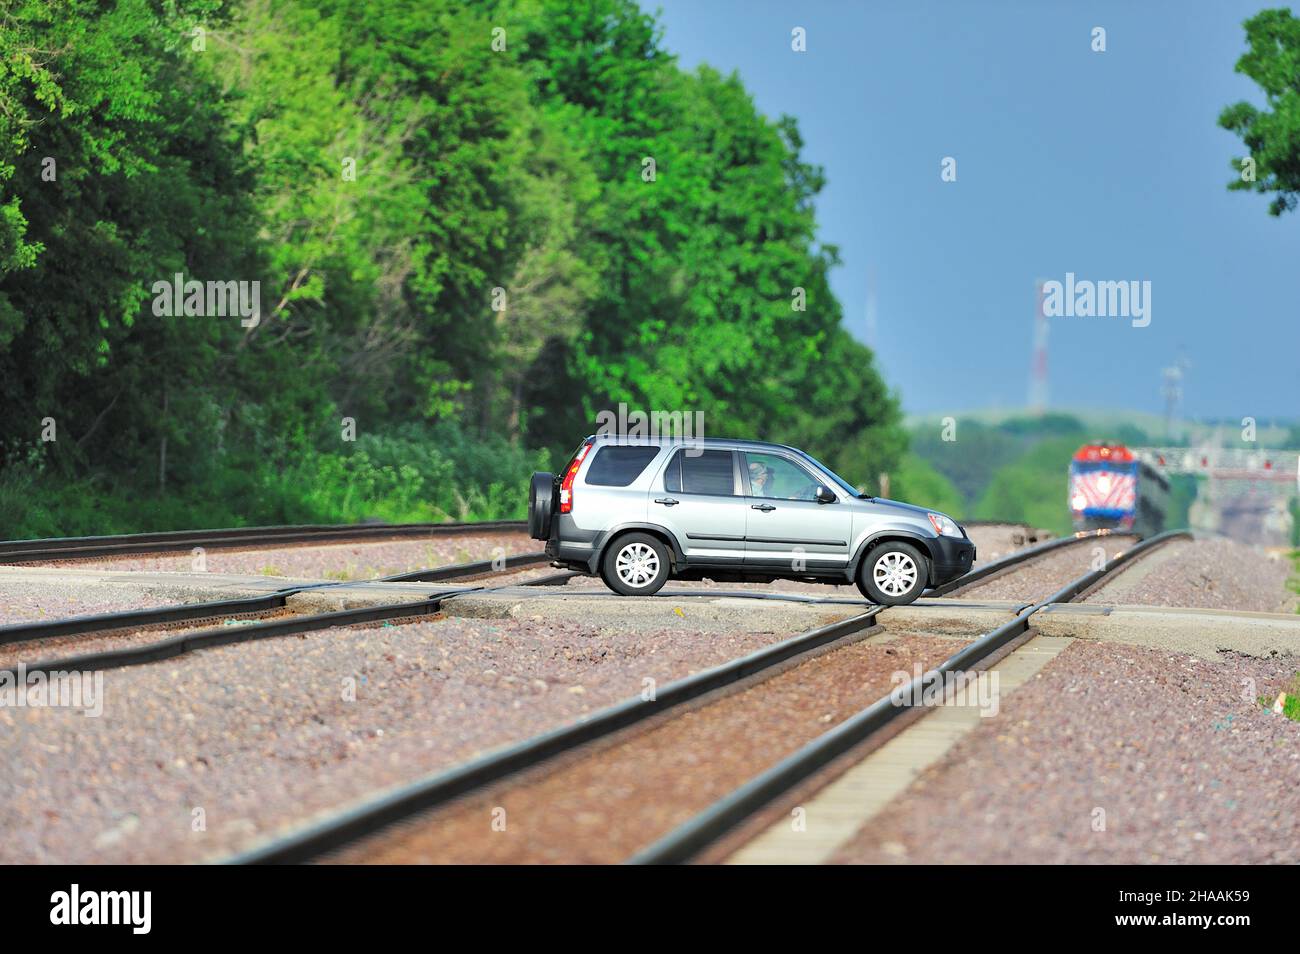 LaFox, Illinois, USA. A vehicle going over Union Pacific tracks as a Metra commuter train bares down on the country grade crossing. Stock Photo